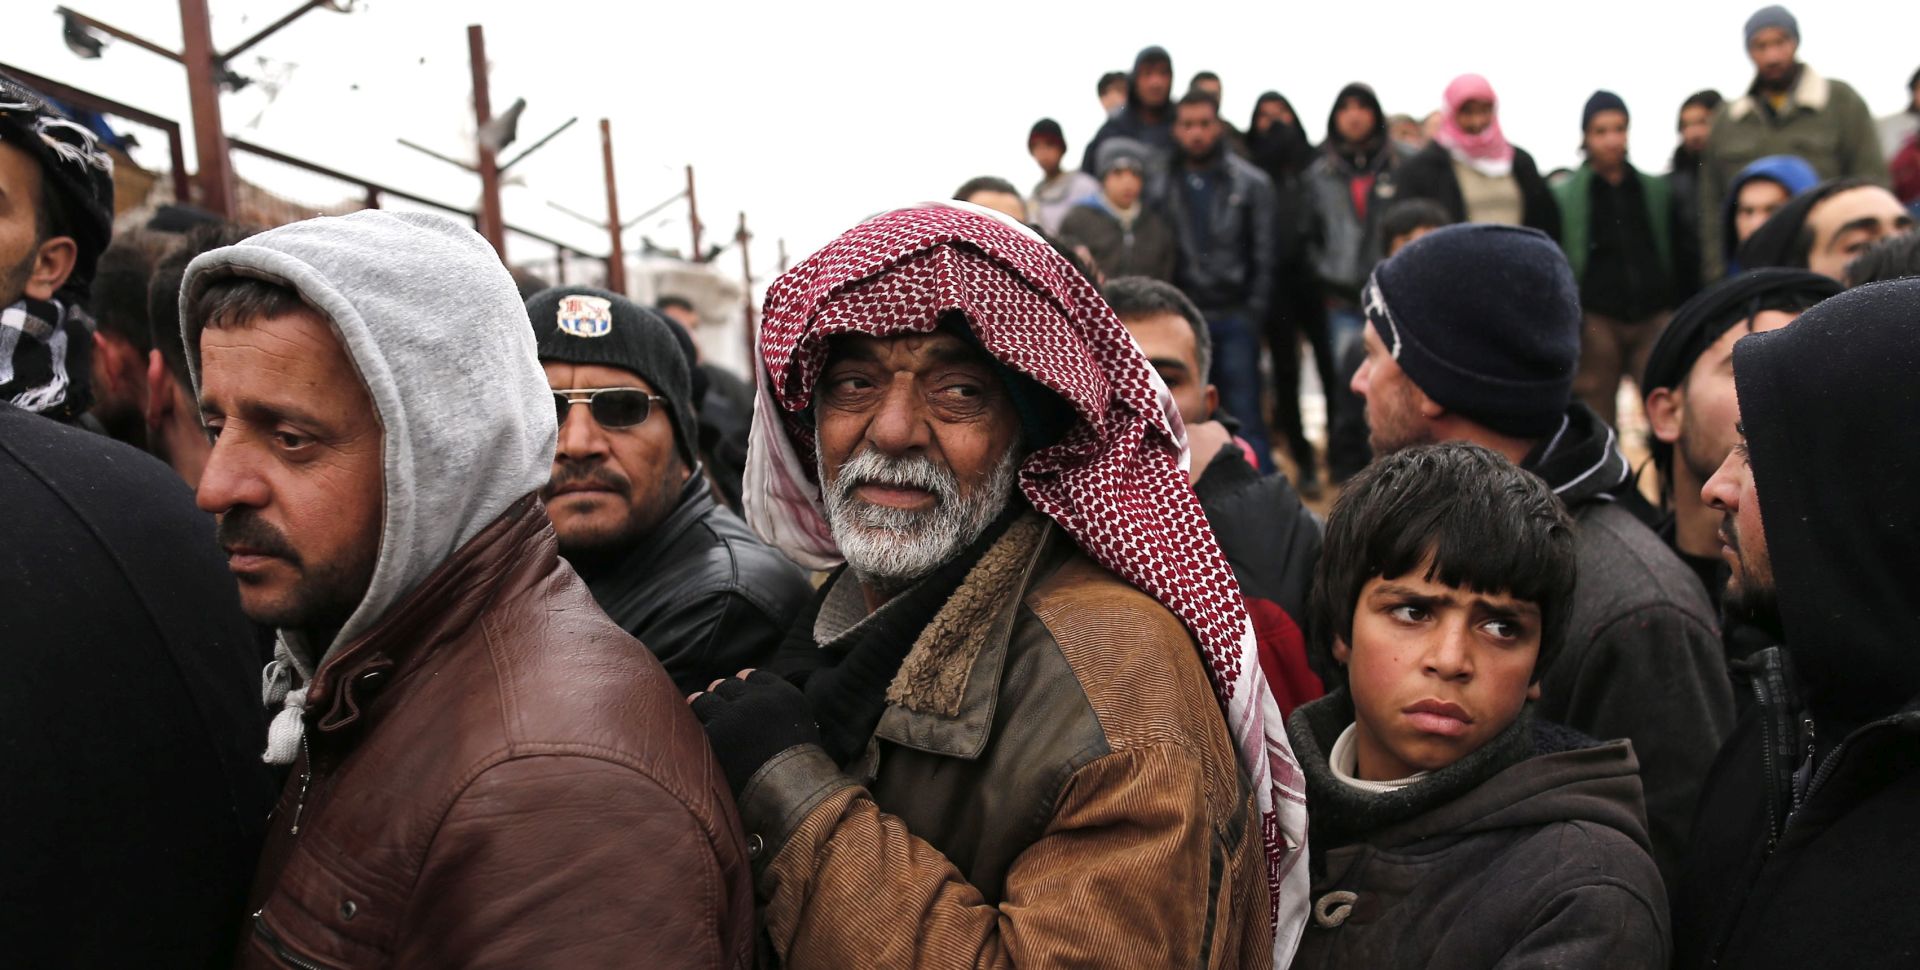 epa05145817 Syrian refugees wait for food near a refugee camp in Bab Al-Salama city, northern Syria, 06 February 2016. A new wave of Syrian refugees leaving the country is expected to reach Turkey, according to local news. The Syrian Observatory for Human Rights said some 40,000 people were on the move in Aleppo province, after the Syrian army entered two pro-government Shiite towns outside of Aleppo and advanced against rebel forces in the northern province a day earlier, threatening to entirely encircle the opposition-held parts of the key city.  EPA/SEDAT SUNA